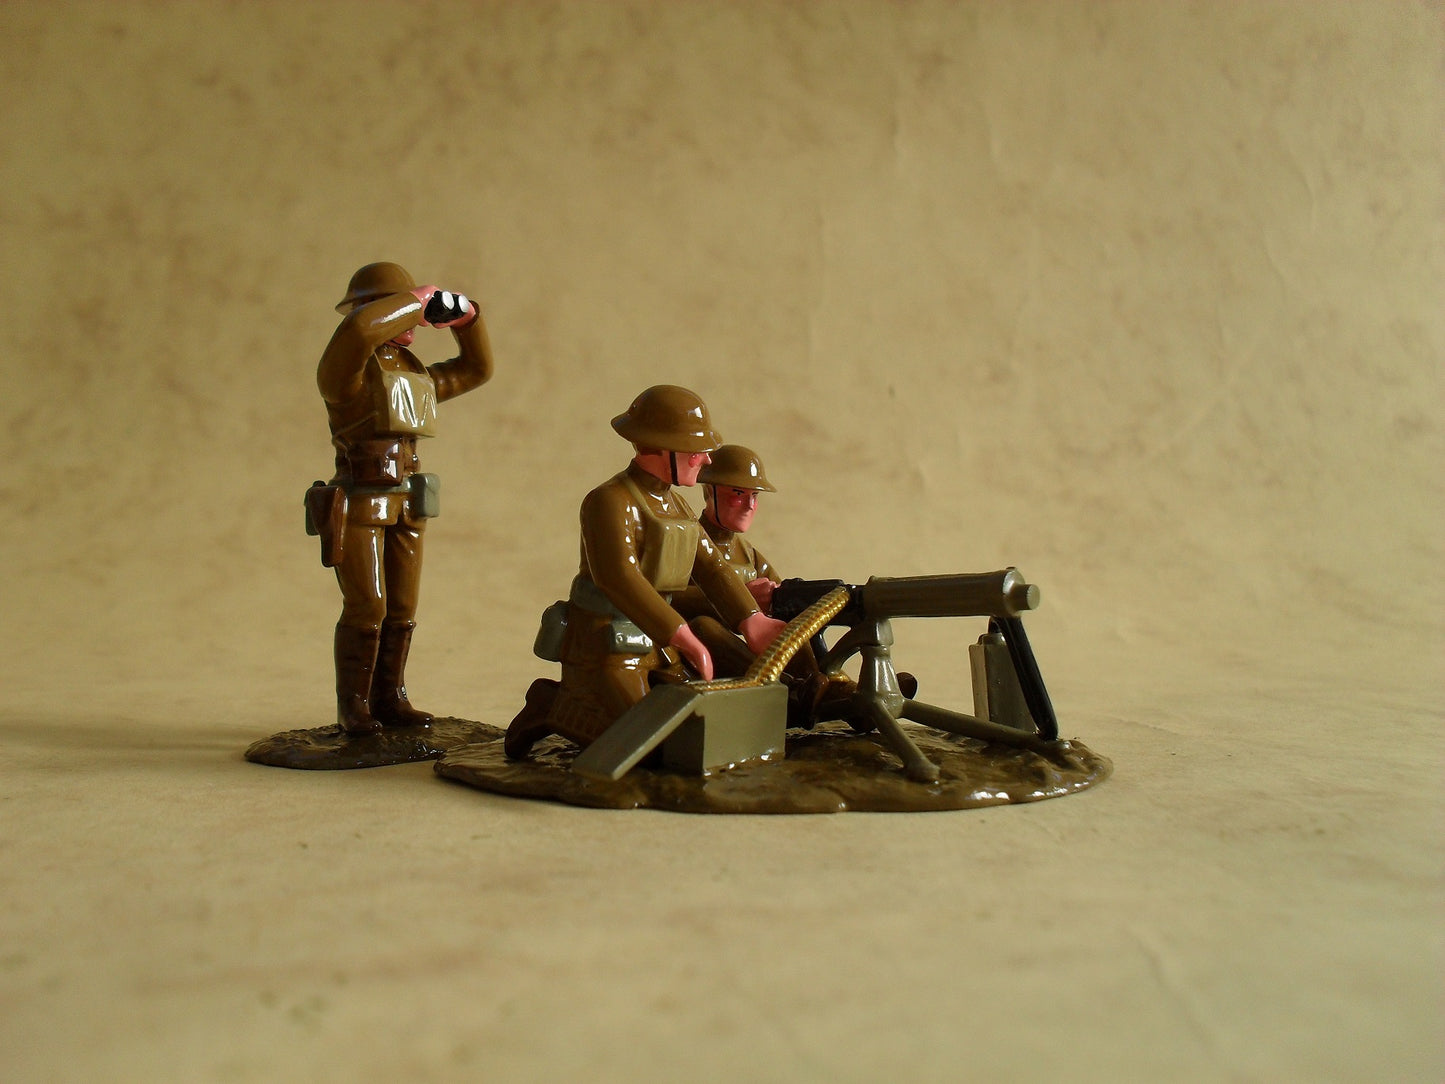 Toy soldier set featuring an American Vickers machine gun crew during World War I. The set includes three figures: one officer standing and observing through binoculars, and two crew members seated at the Vickers machine gun. The figures are dressed in period-appropriate military uniforms with steel helmets. They are positioned on a small, muddy terrain base, capturing a moment of intense focus and preparation for action.